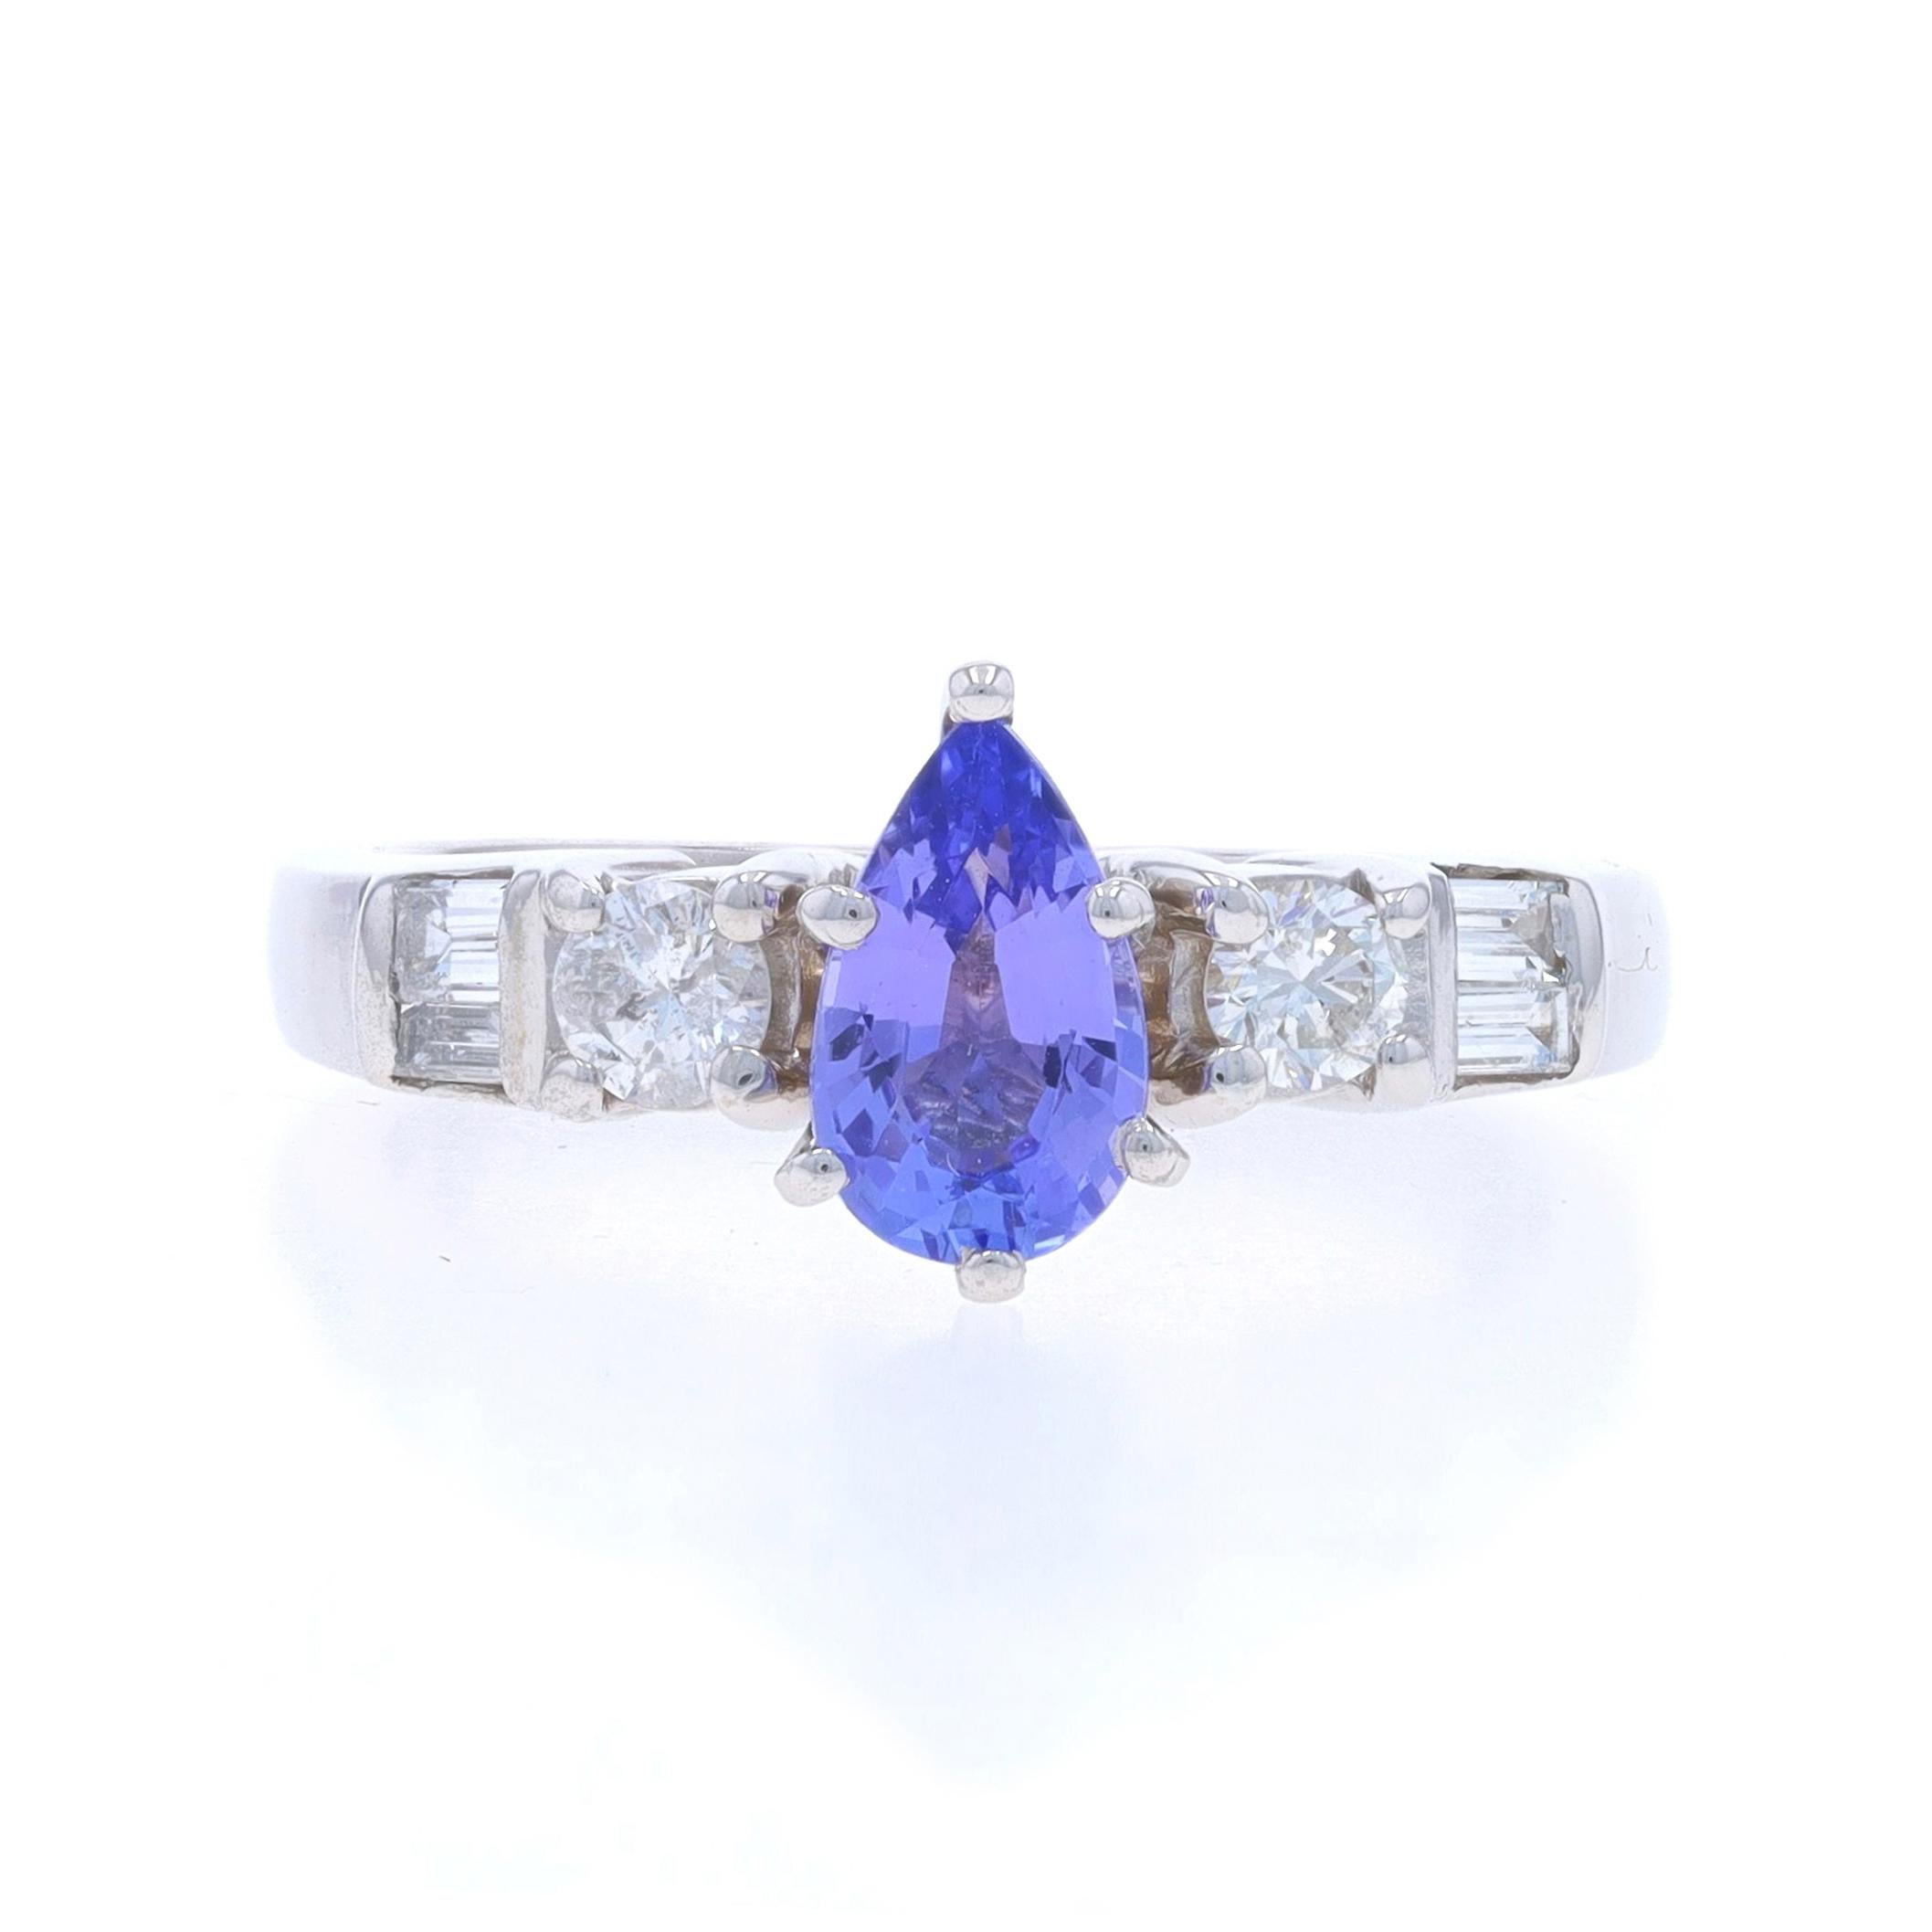 Size: 7 3/4
Sizing Fee: Up 1/2 a size for $40 or Down 1 size for $40

Metal Content: 14k White Gold

Stone Information

Natural Tanzanite
Treatment: Routinely Enhanced
Carat(s): .86ct
Cut: Pear
Color: Purple

Natural Diamonds
Carat(s): .40ctw
Cut: